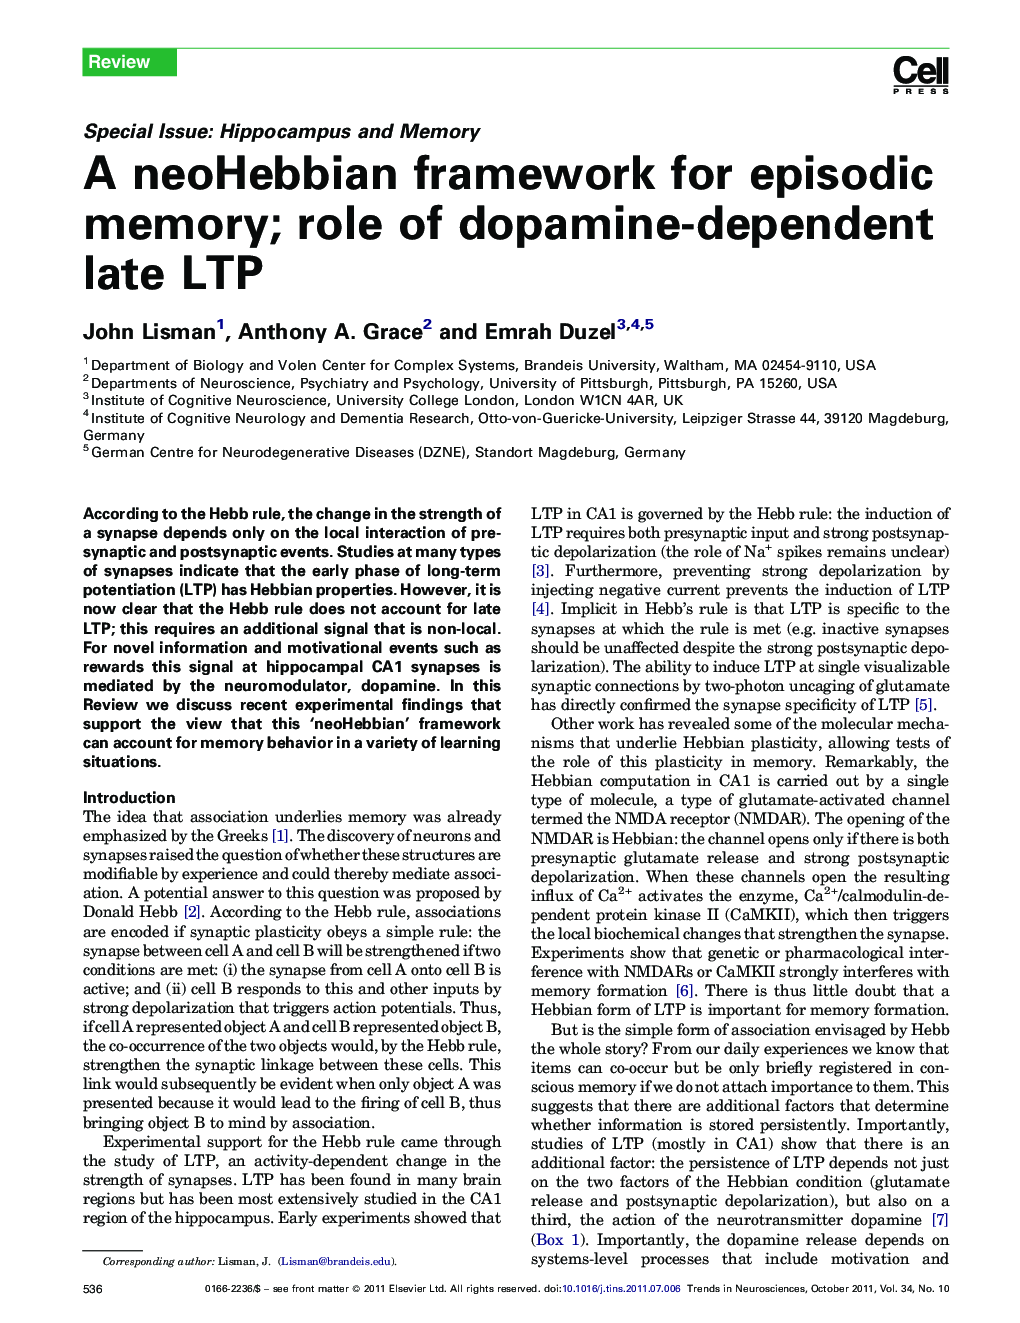 A neoHebbian framework for episodic memory; role of dopamine-dependent late LTP